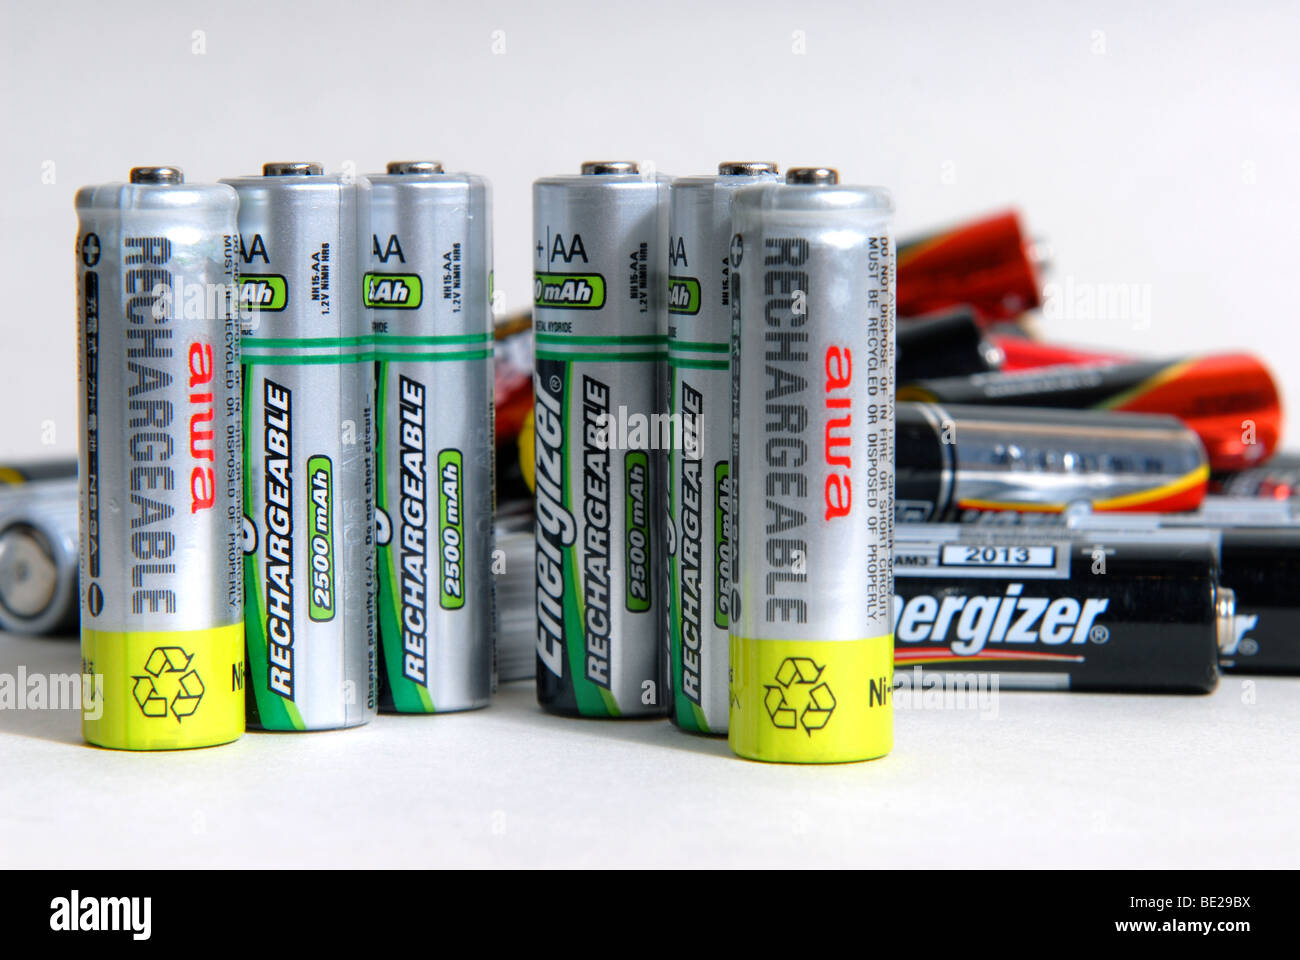 go green and either recycle batteries or use rechargable ones. generic  battery images with a green message Stock Photo - Alamy